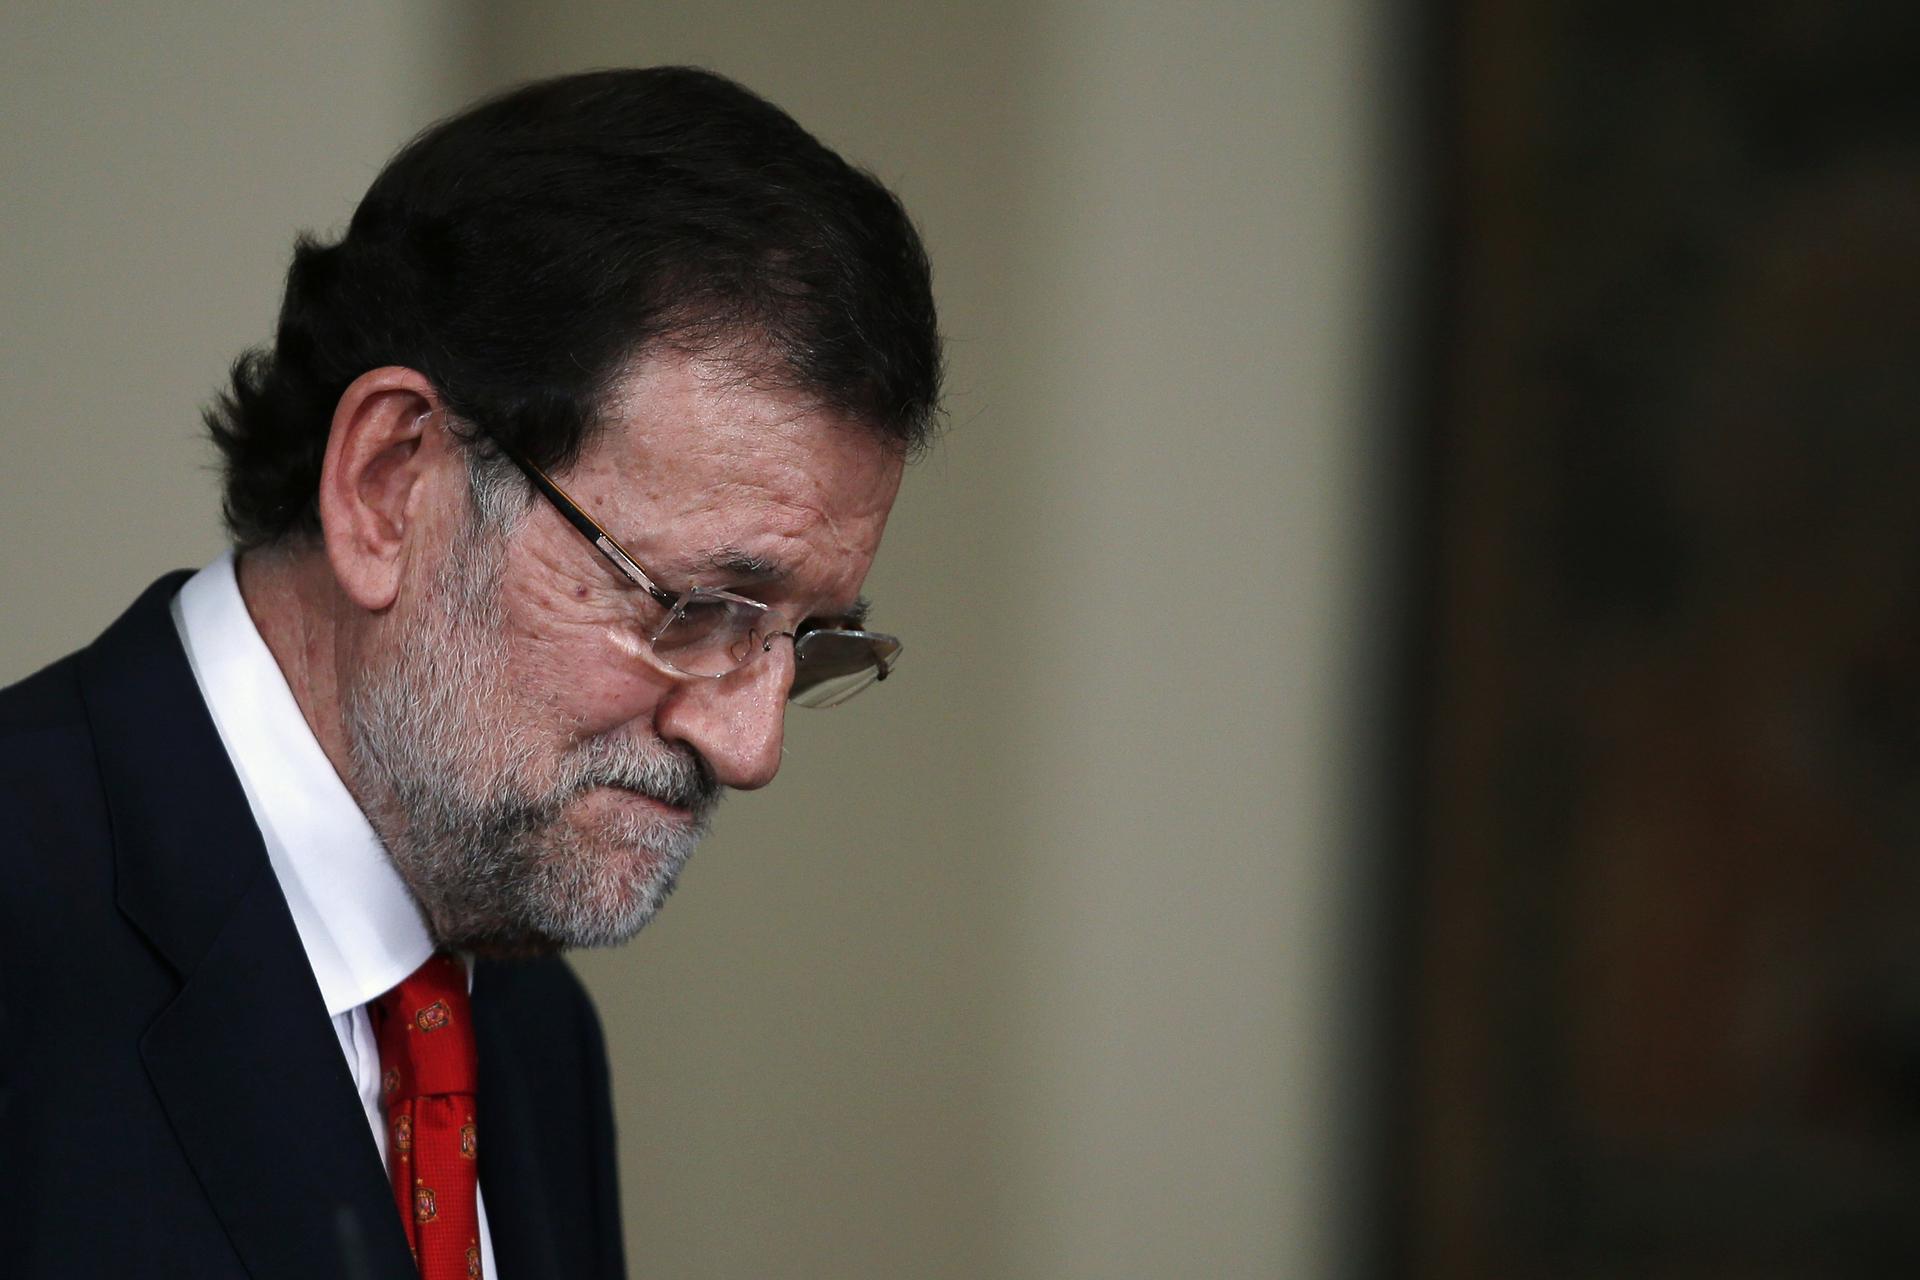 Spanish prime minister, Mariano Rajoy, faces fresh allegations of corruption against his People's Party.Photo: Reuters